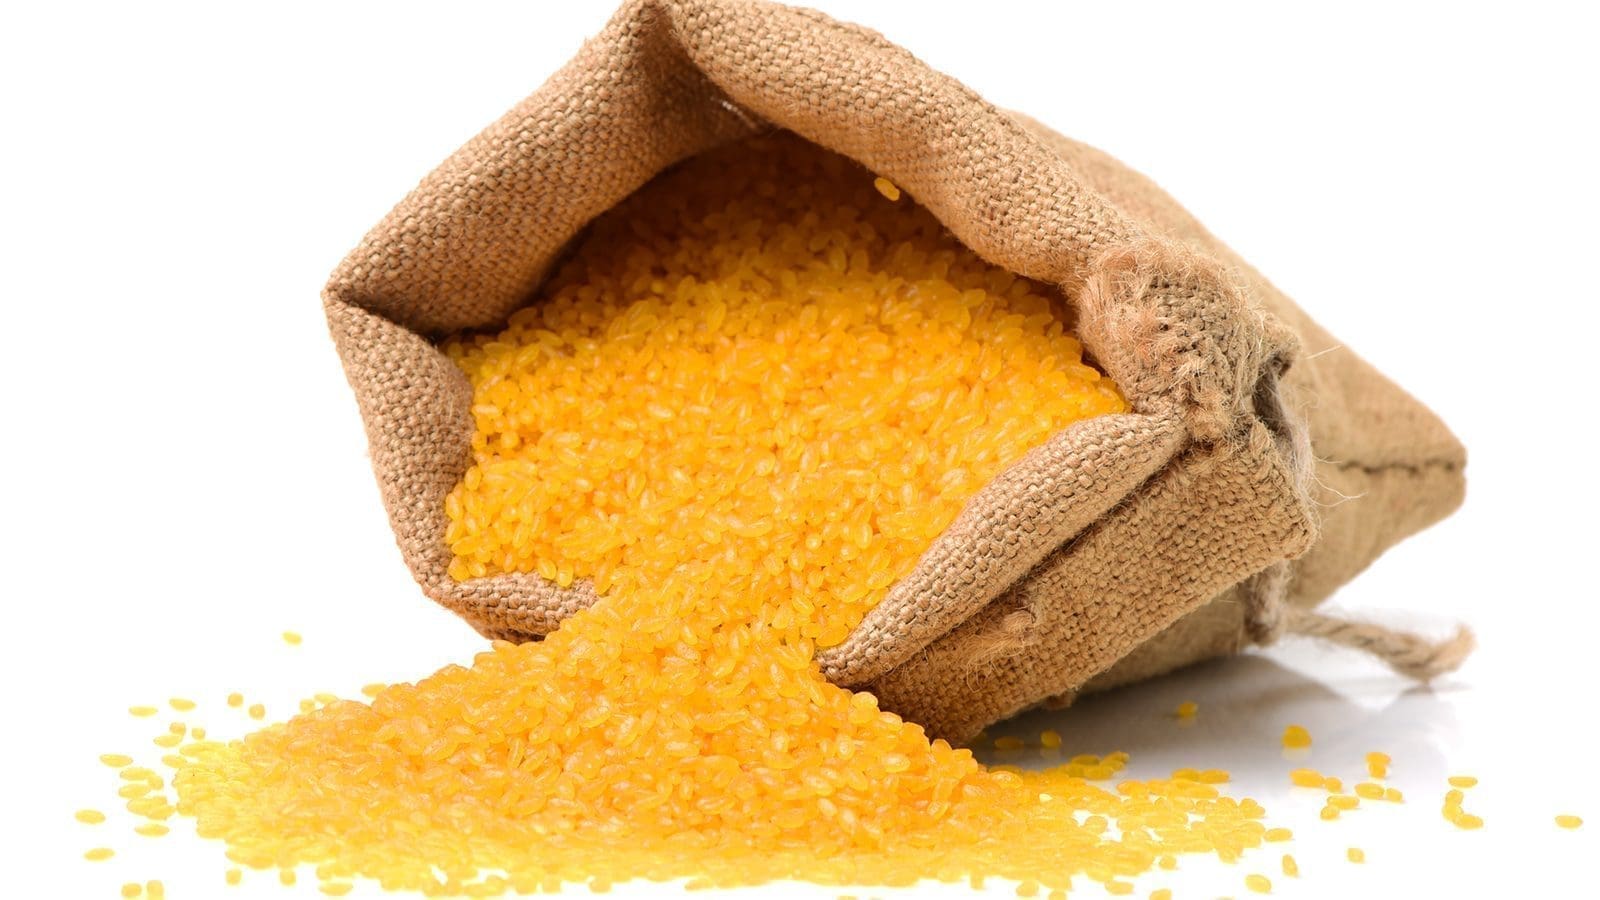 Philippines to fight hidden hunger with recently approved “Golden Rice” variety